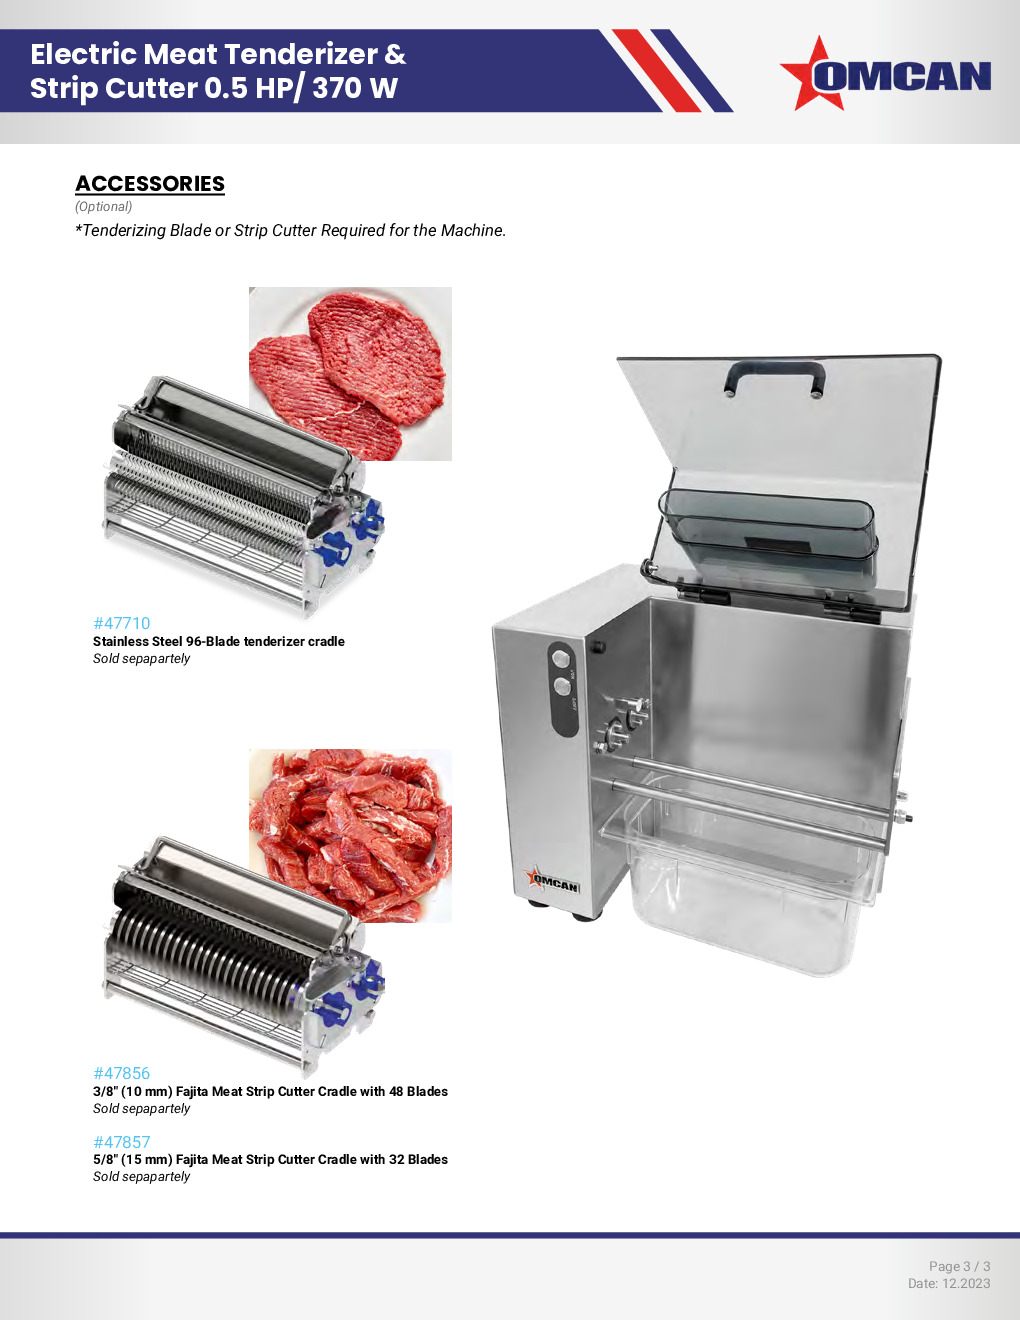 Omcan USA 47709 Electric Meat Tenderizer